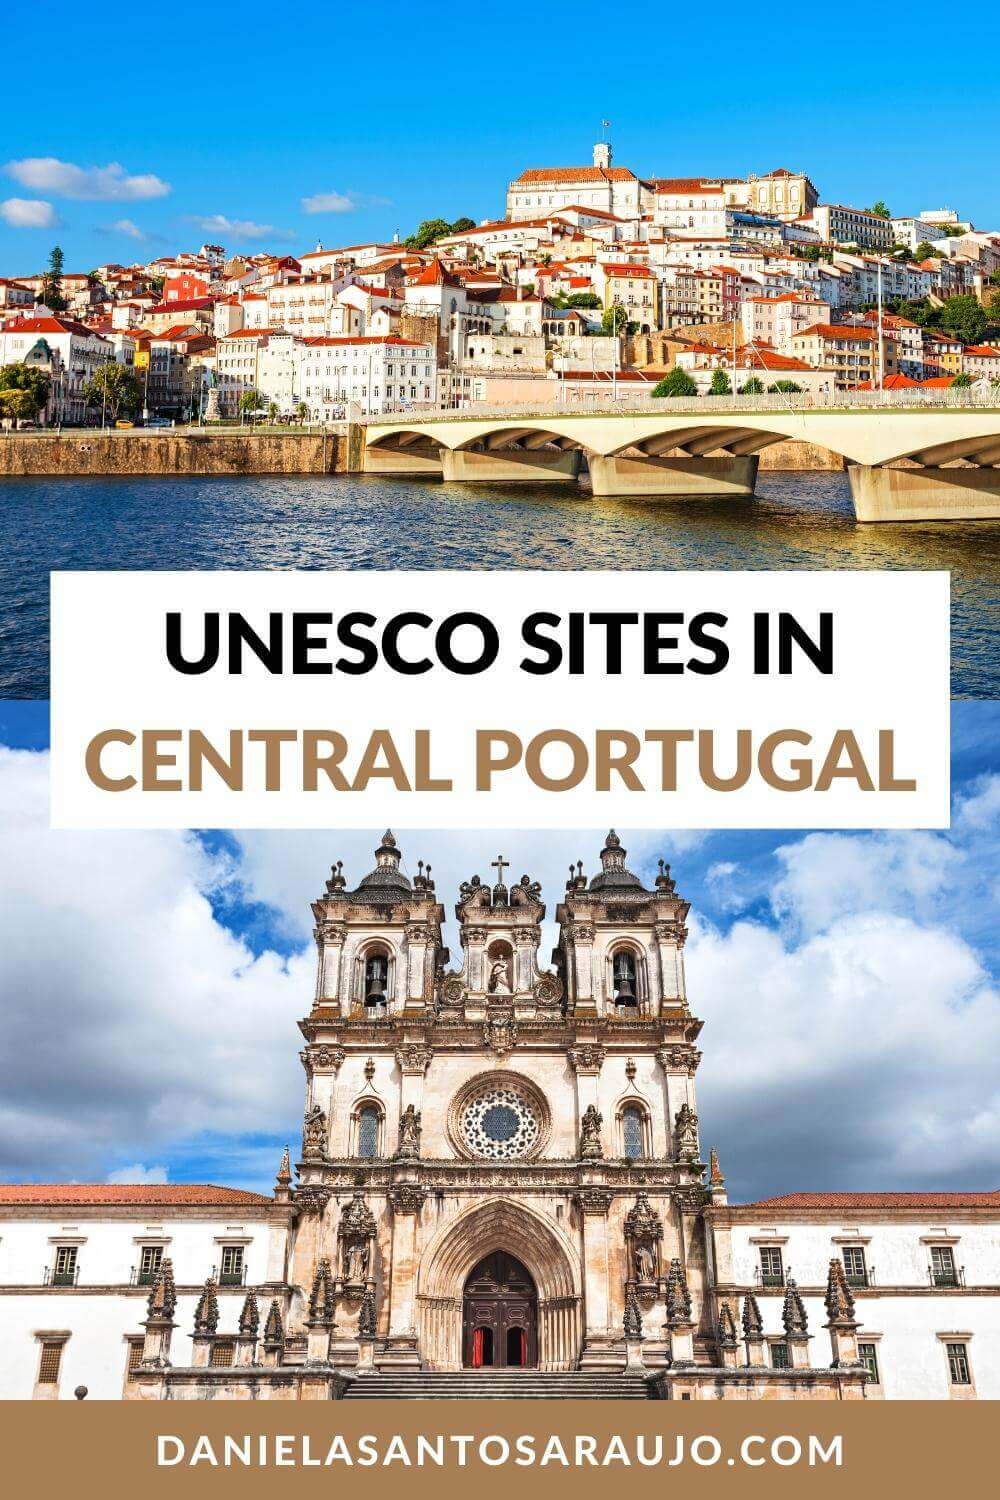 World Heritage in Central Portugal